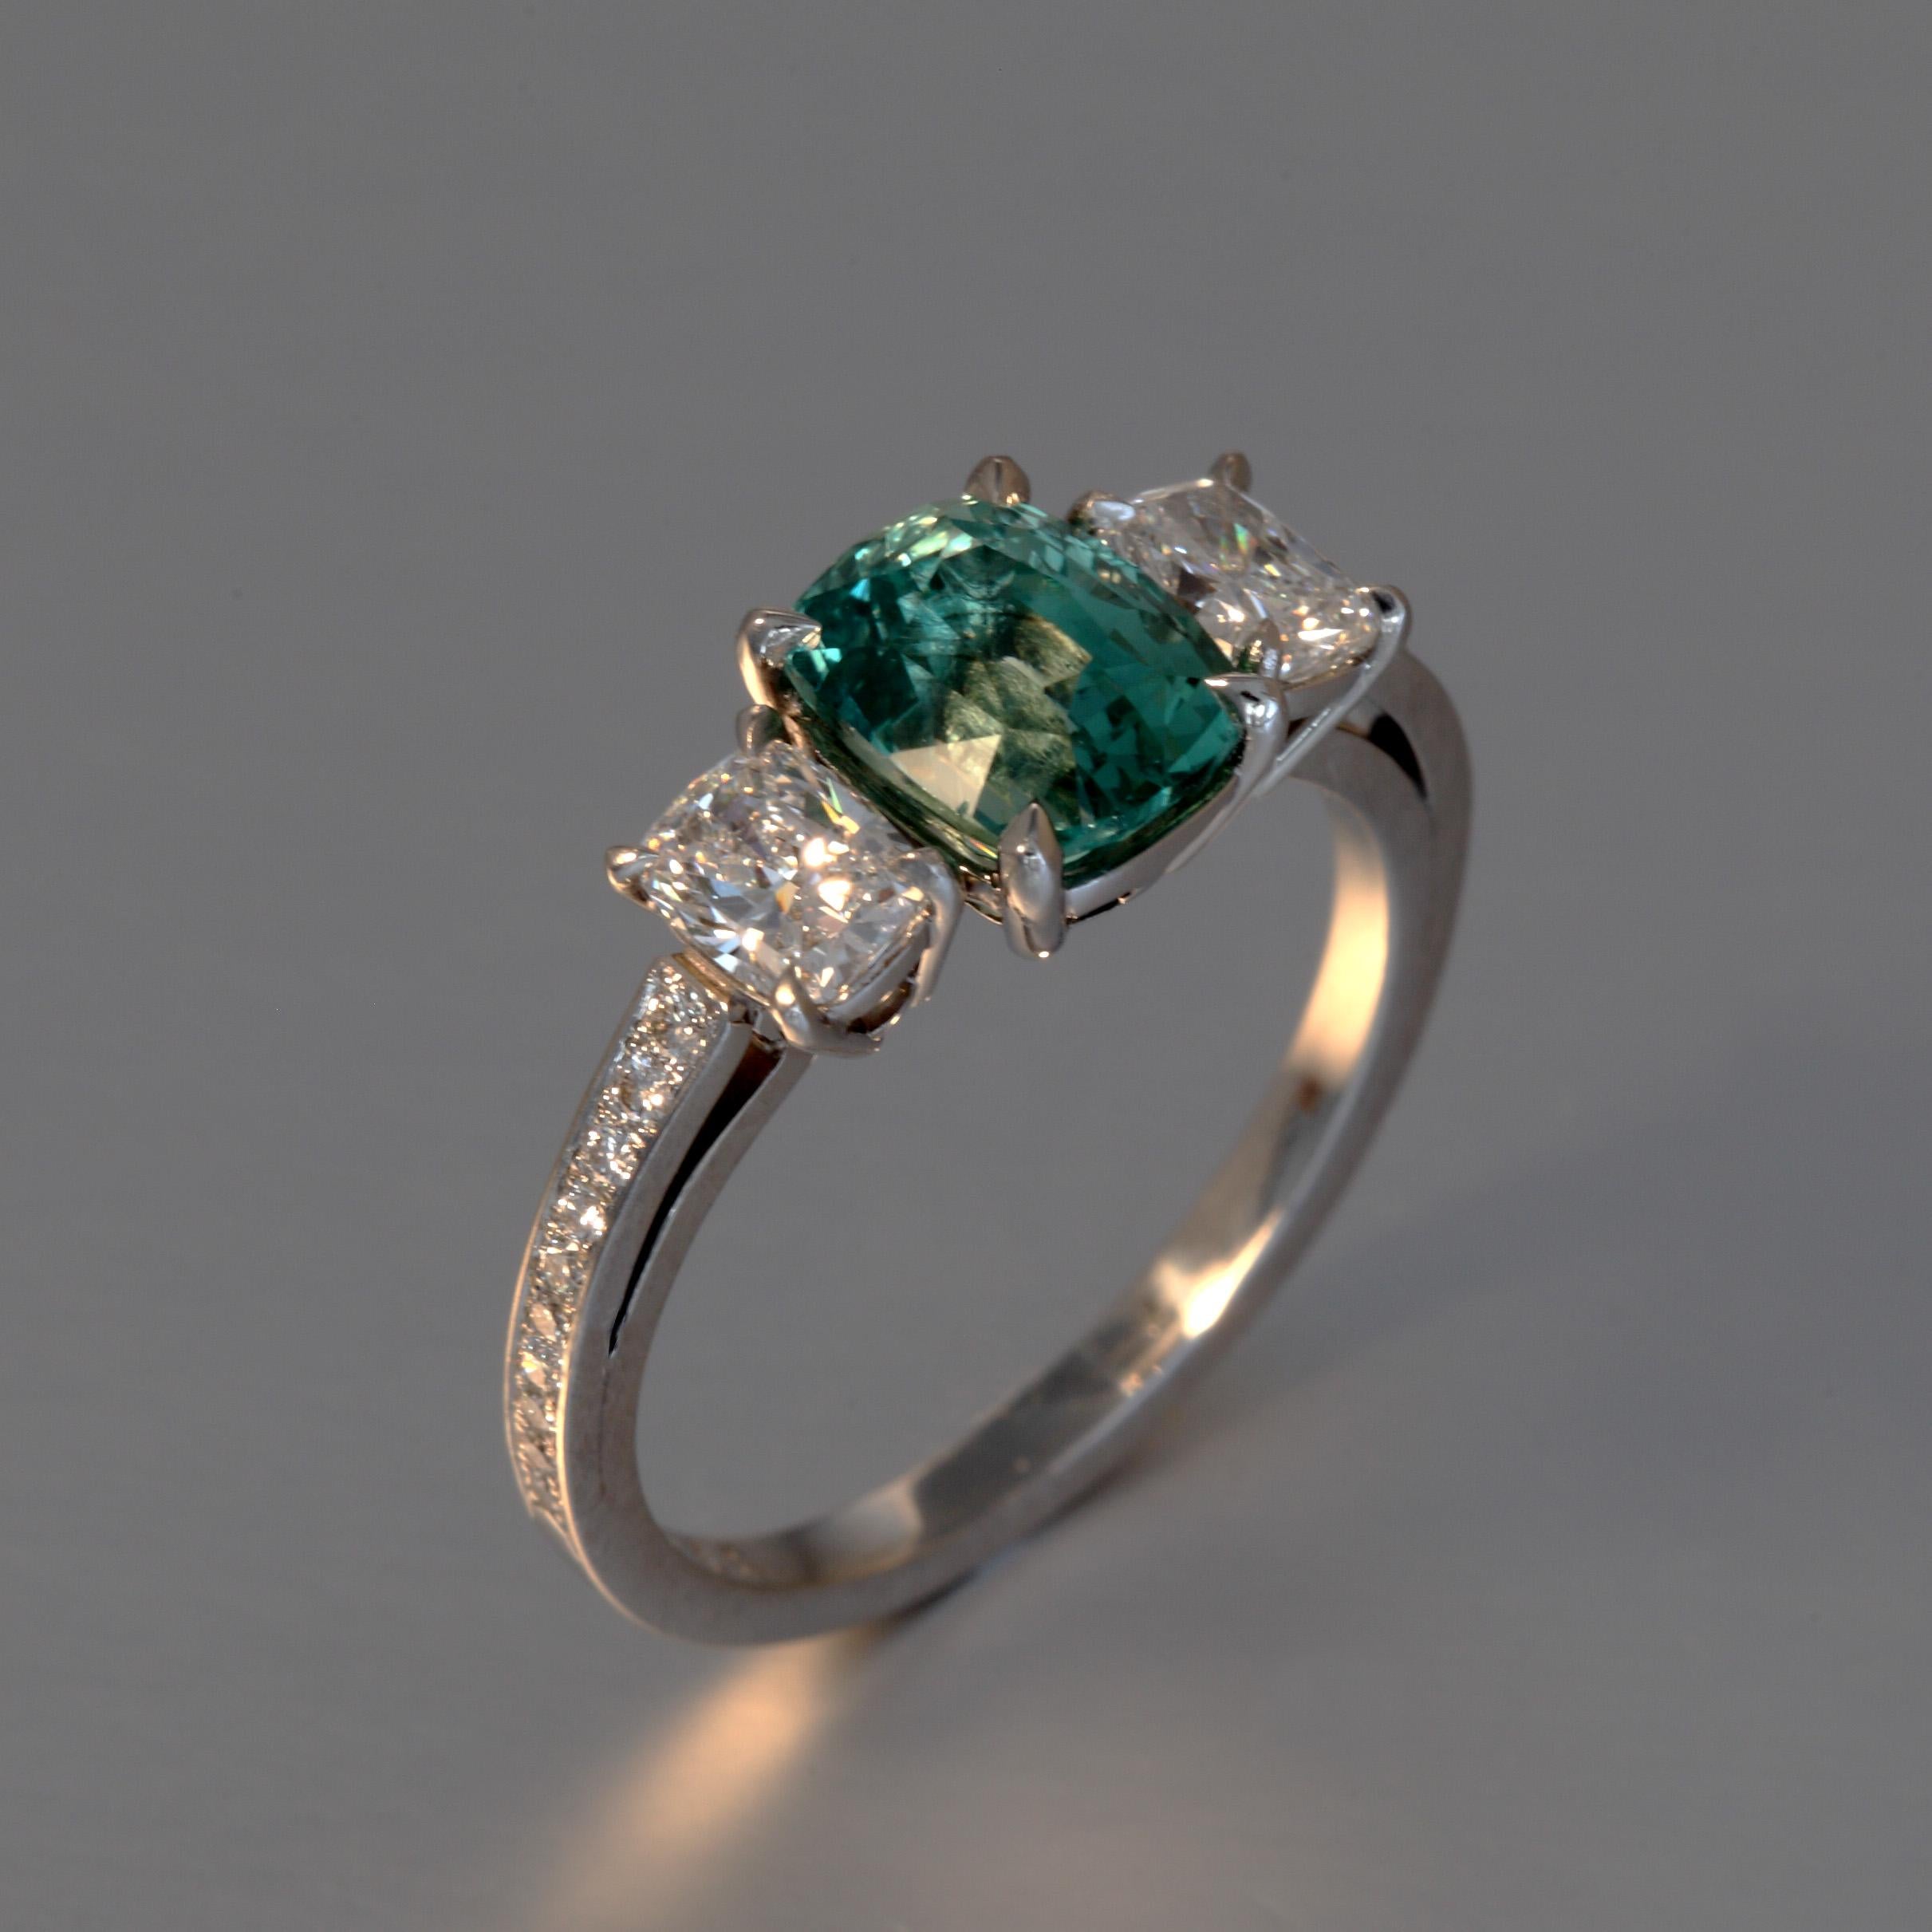 A fine blueish green Vanadium Chrysoberyl of 1.85 carat F,G vvs and two cushion cut diamonds with a total of 0.63 carat are set with 0.10 carat of small round diamonds F,G vvs in a platinum ring. This one of a kind piece is designed and hand made in